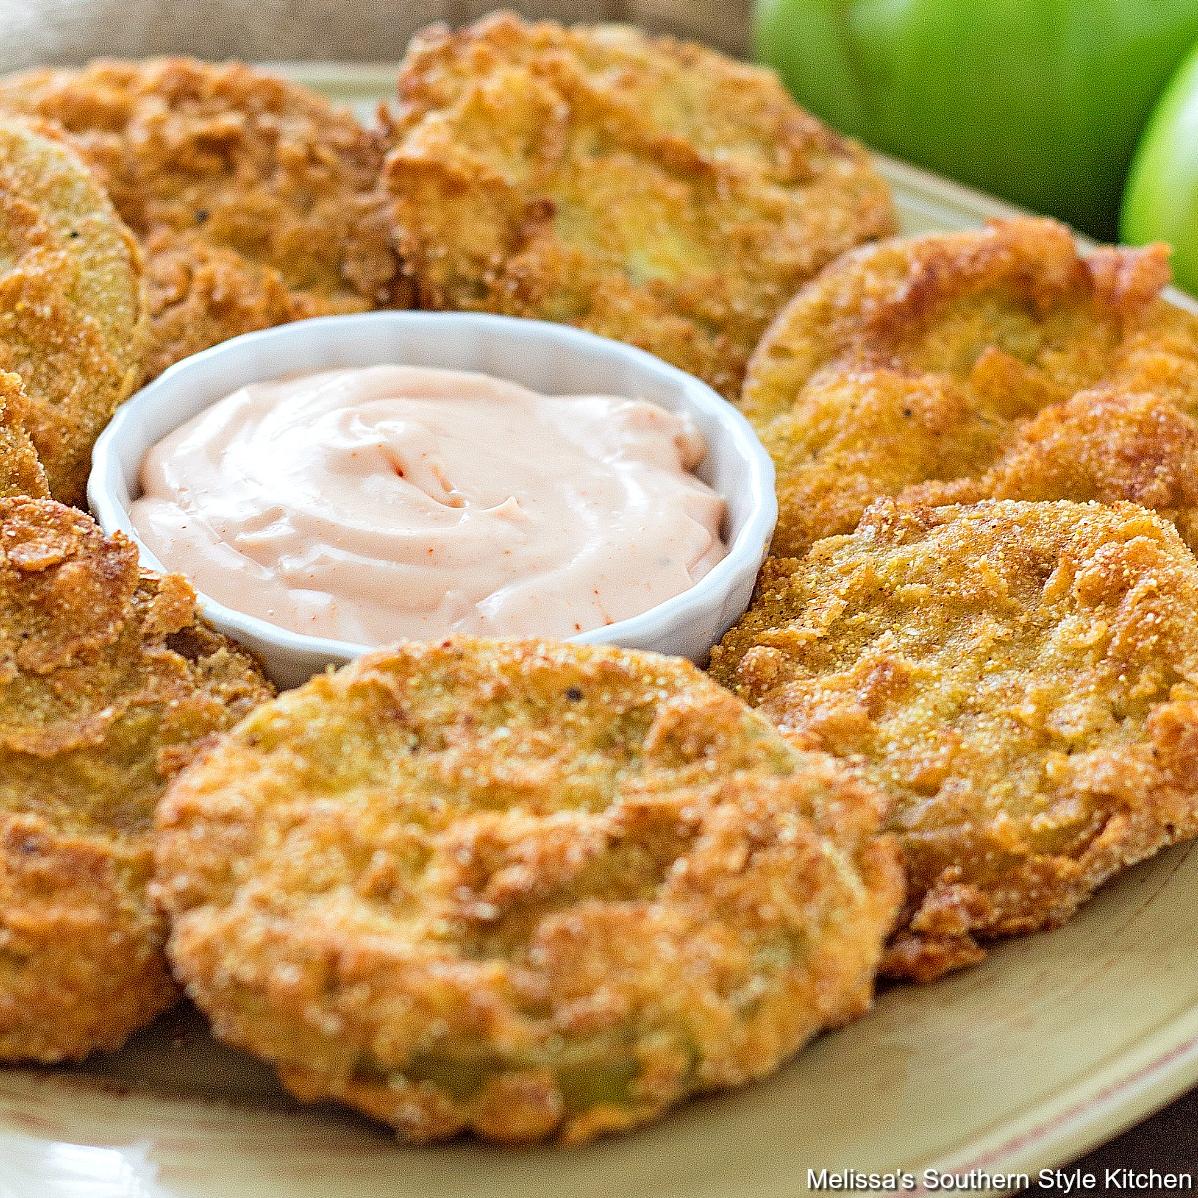  Crispy, golden-brown fried green tomatoes with a hint of heat from the cayenne pepper.